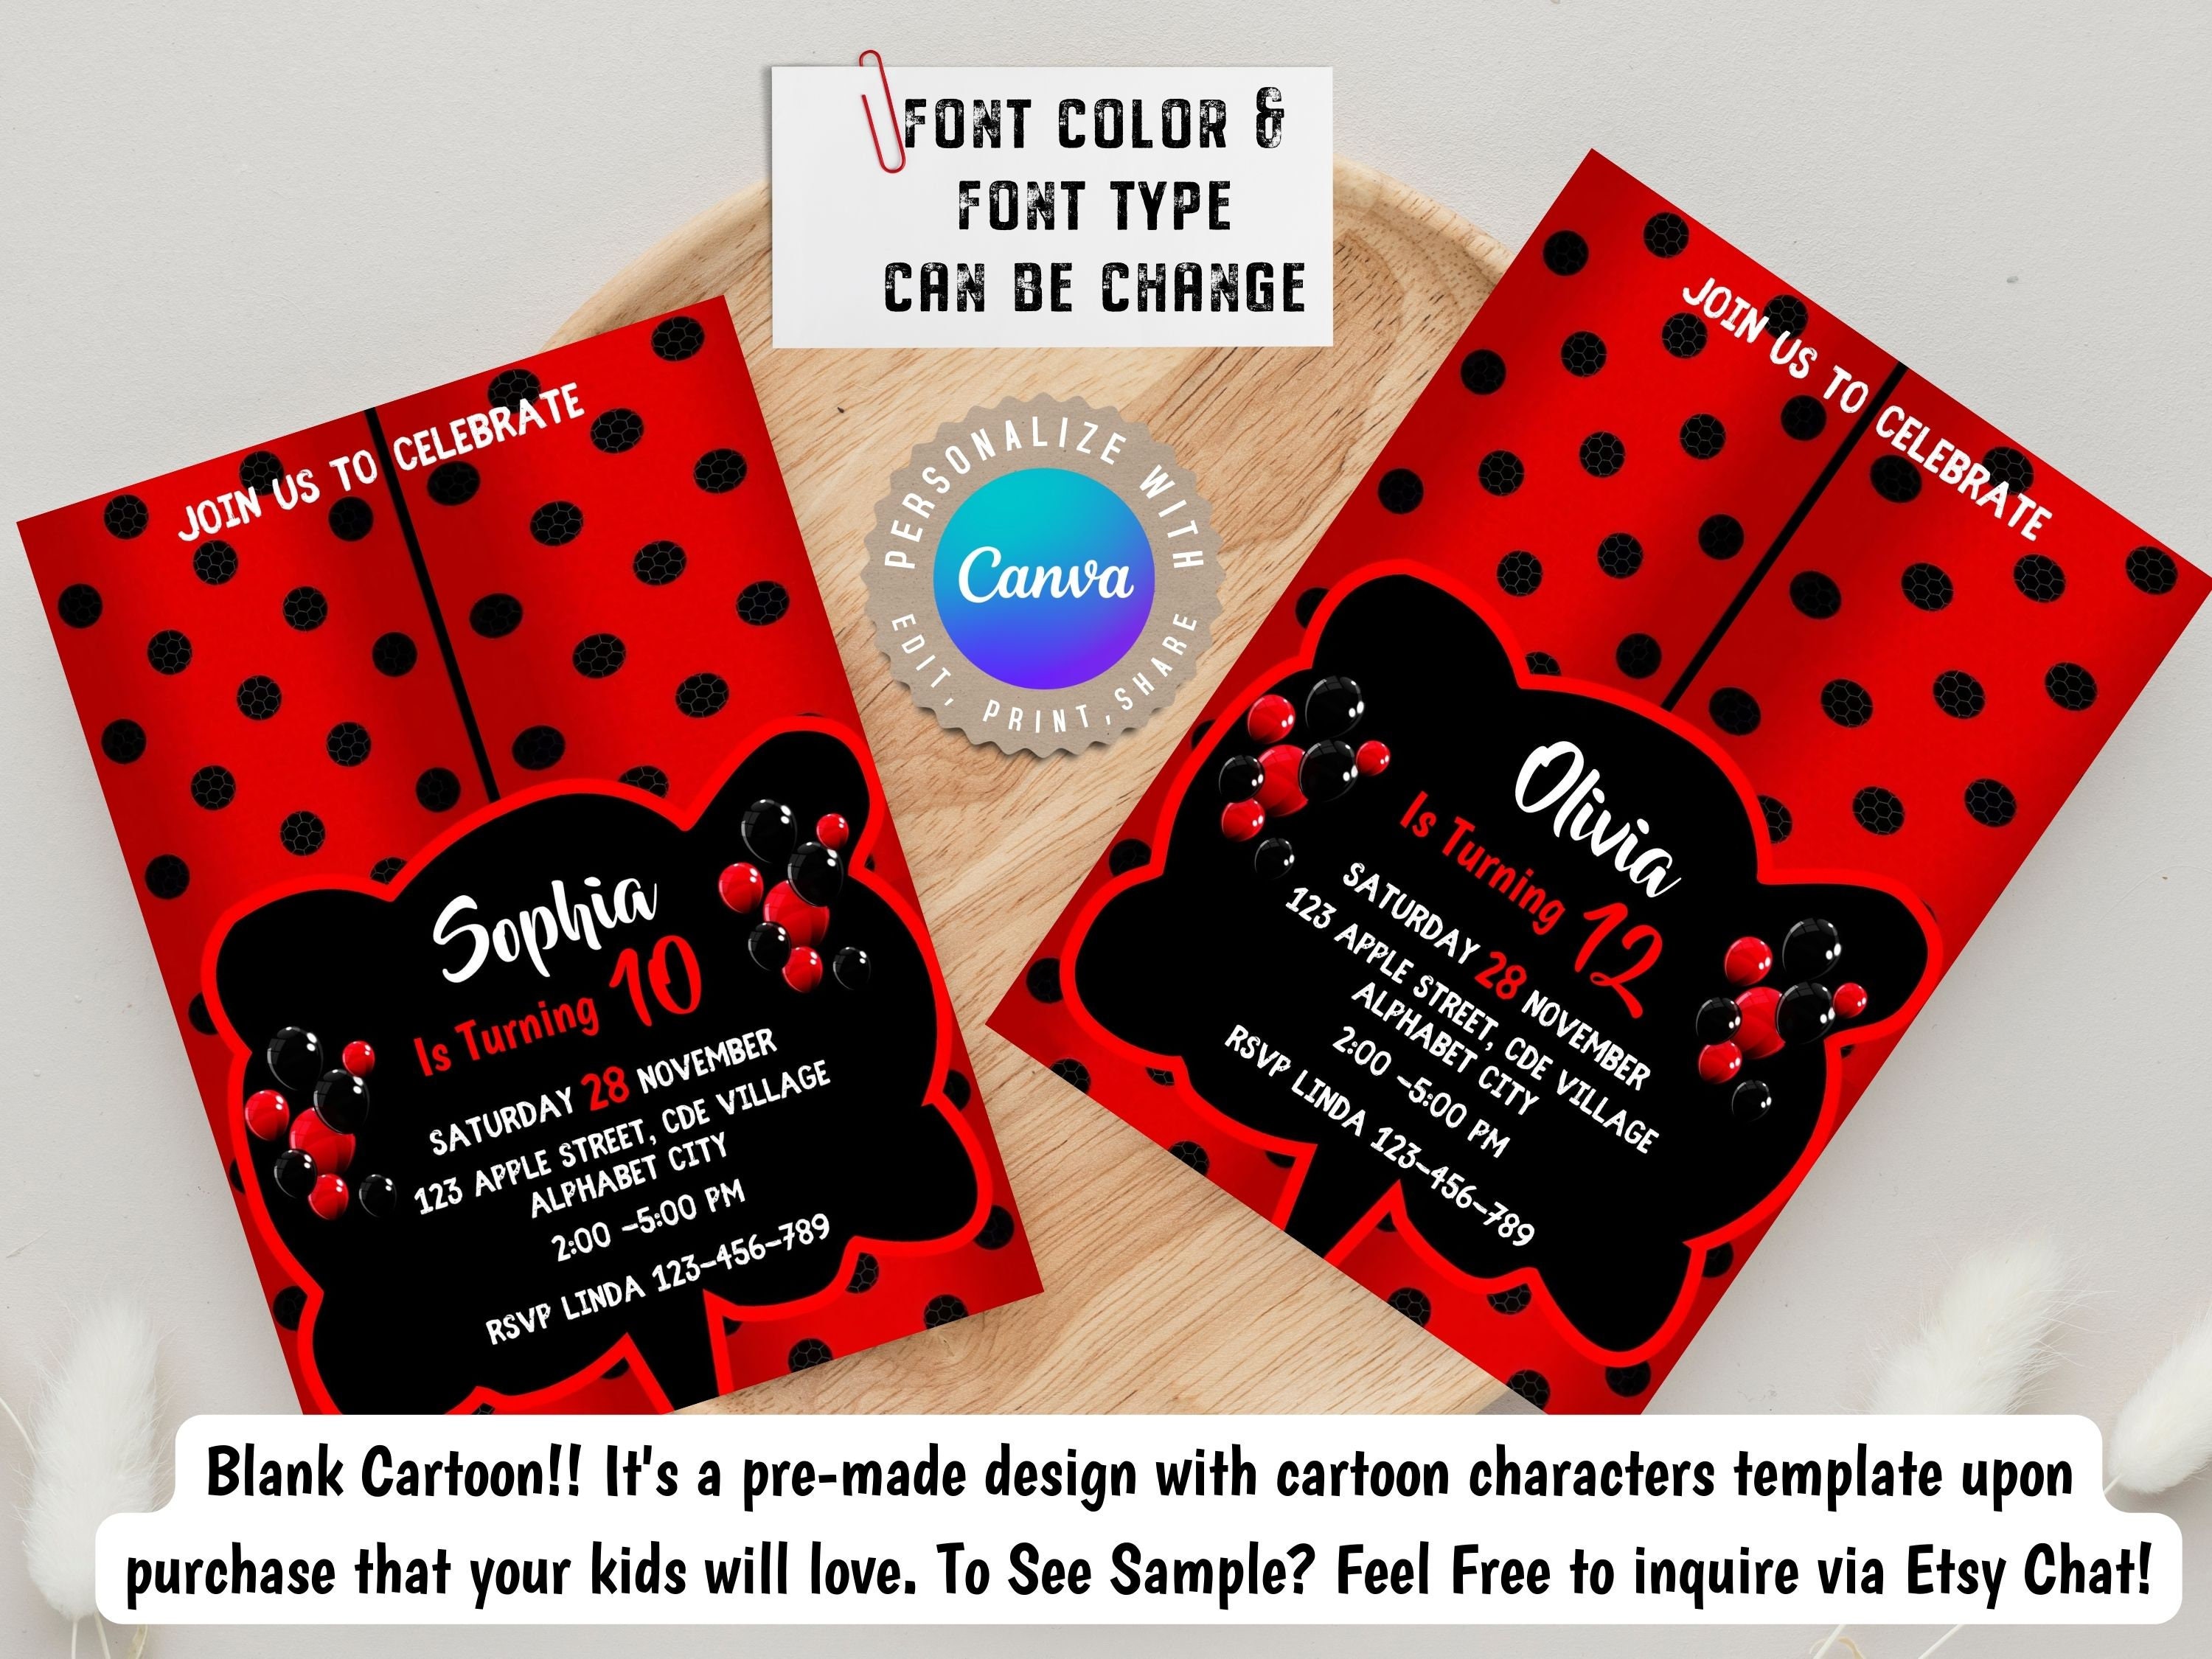 Free Printable Miraculous Ladybug and Cat Noir Masks. - Oh My Fiesta! in  english